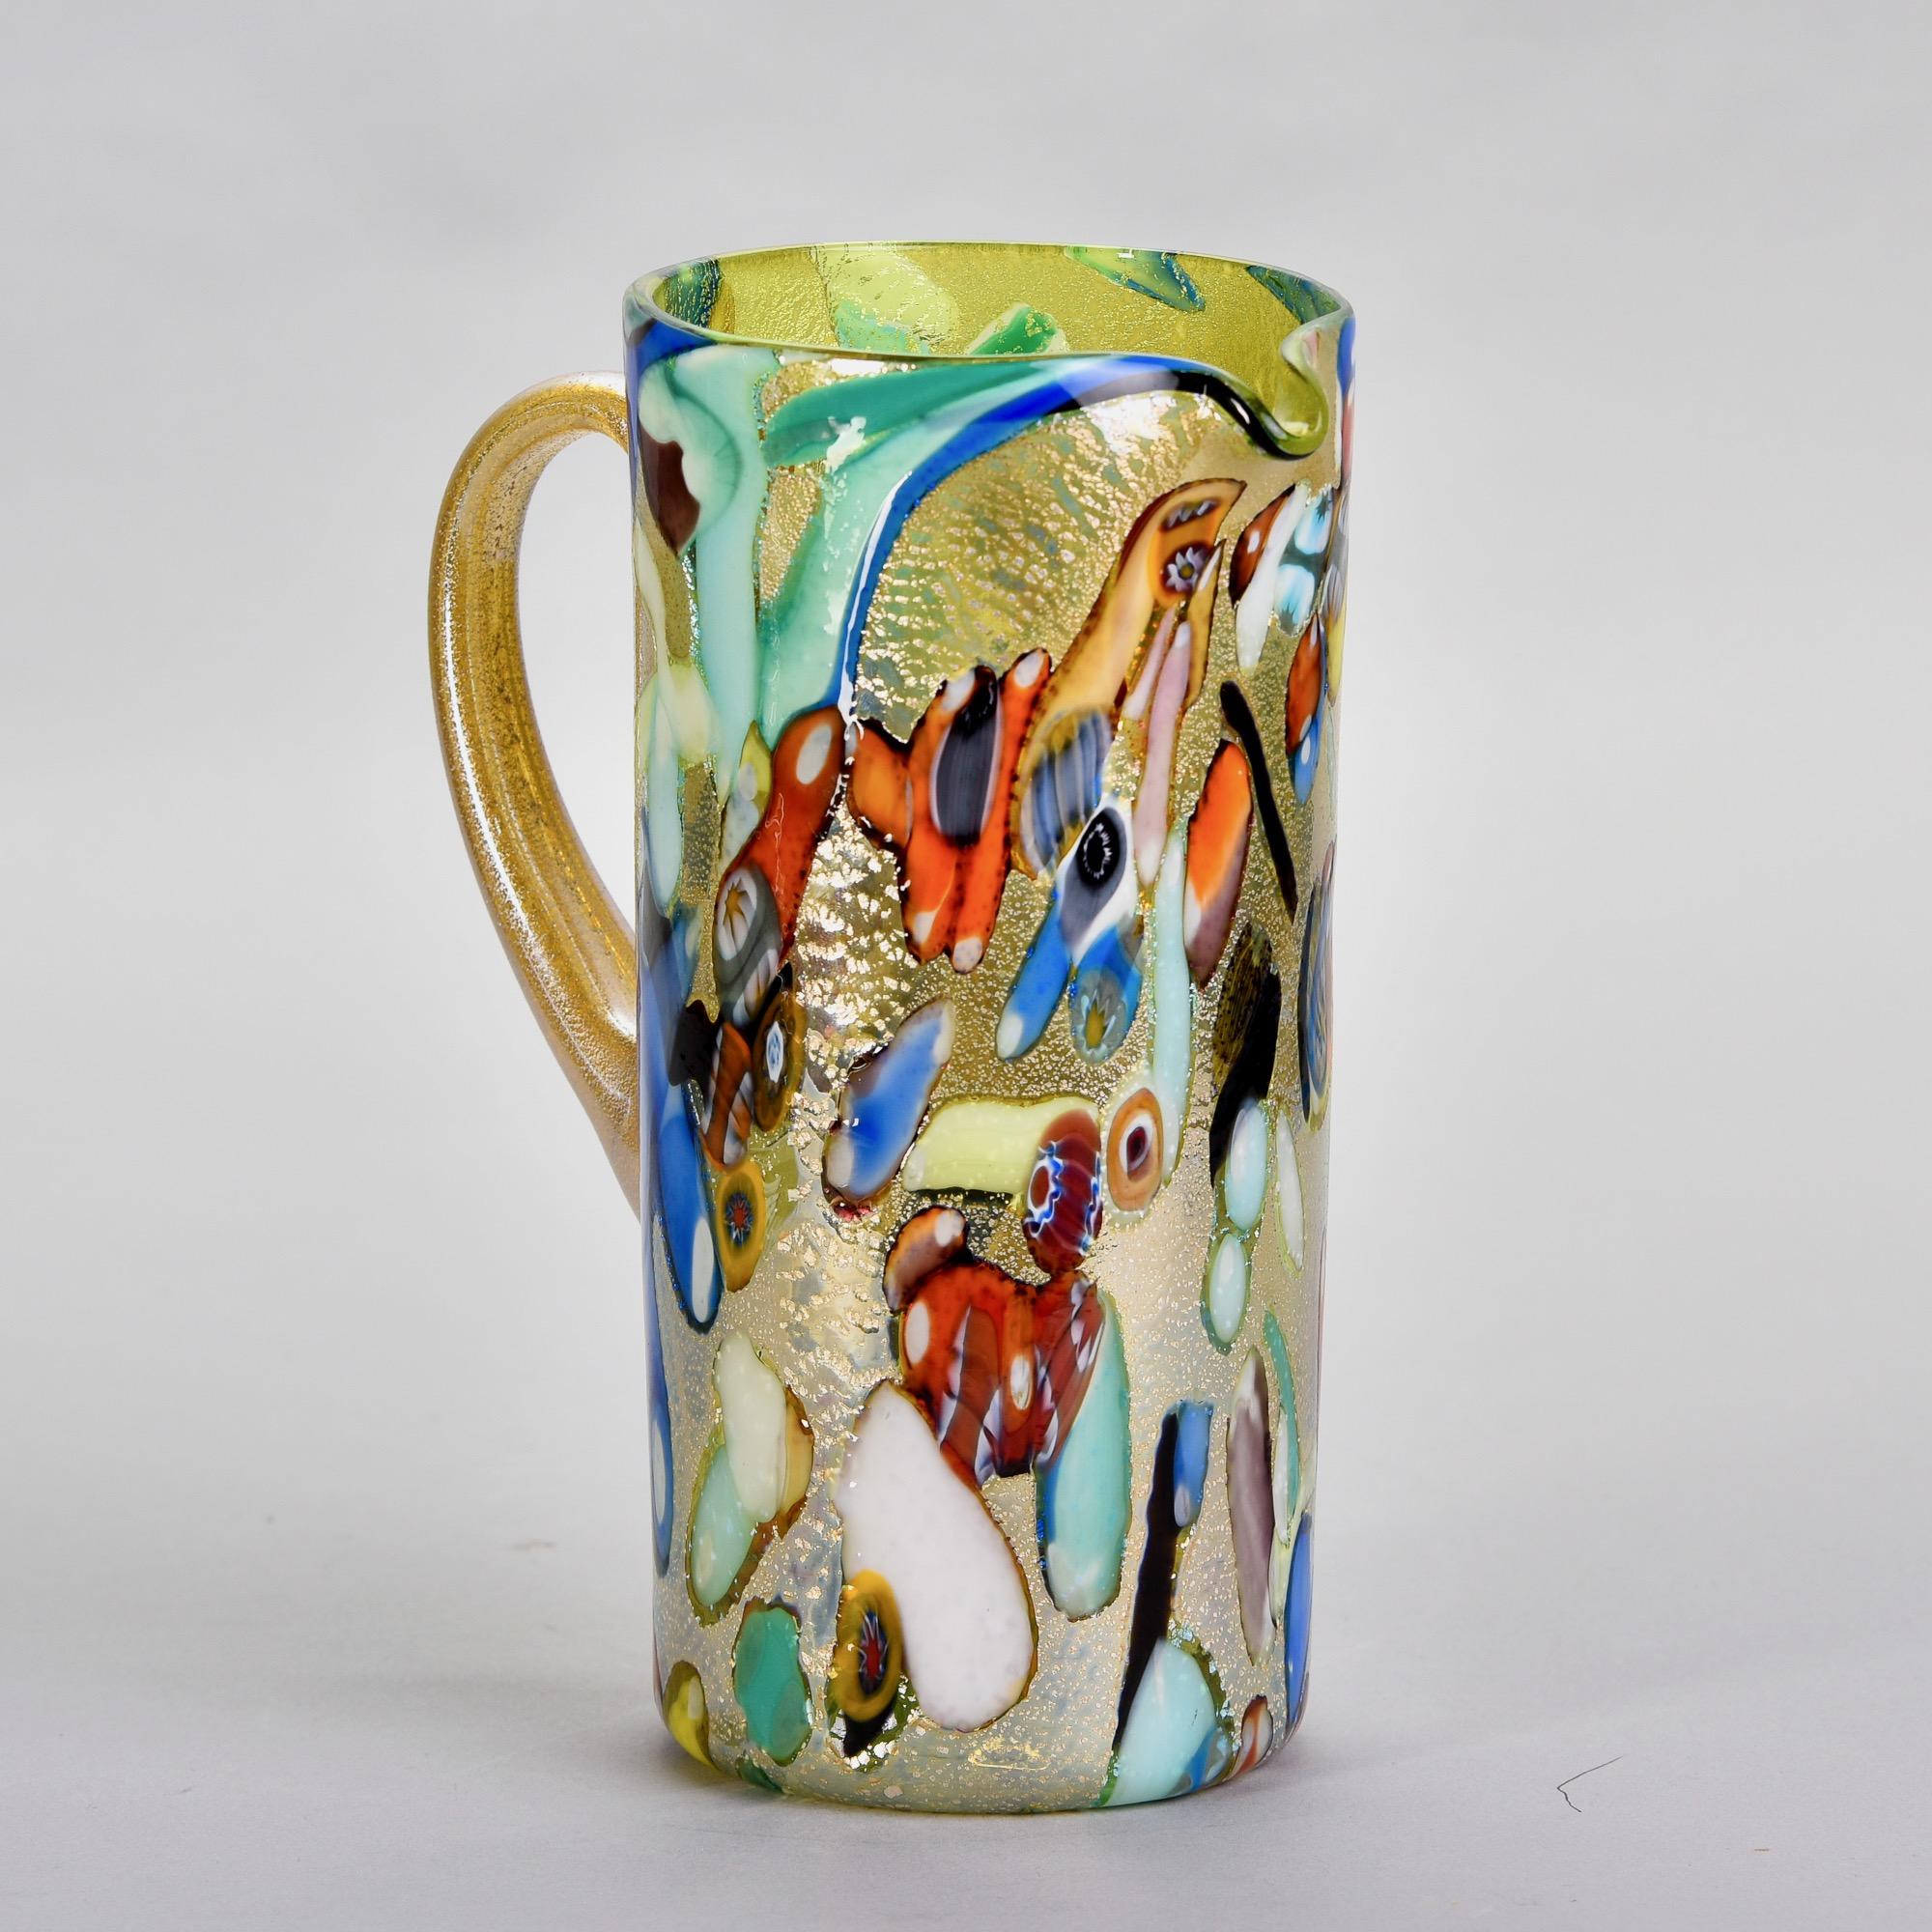 New Murano Glass Pitcher in Gold Green and Multi Colors In New Condition For Sale In Troy, MI